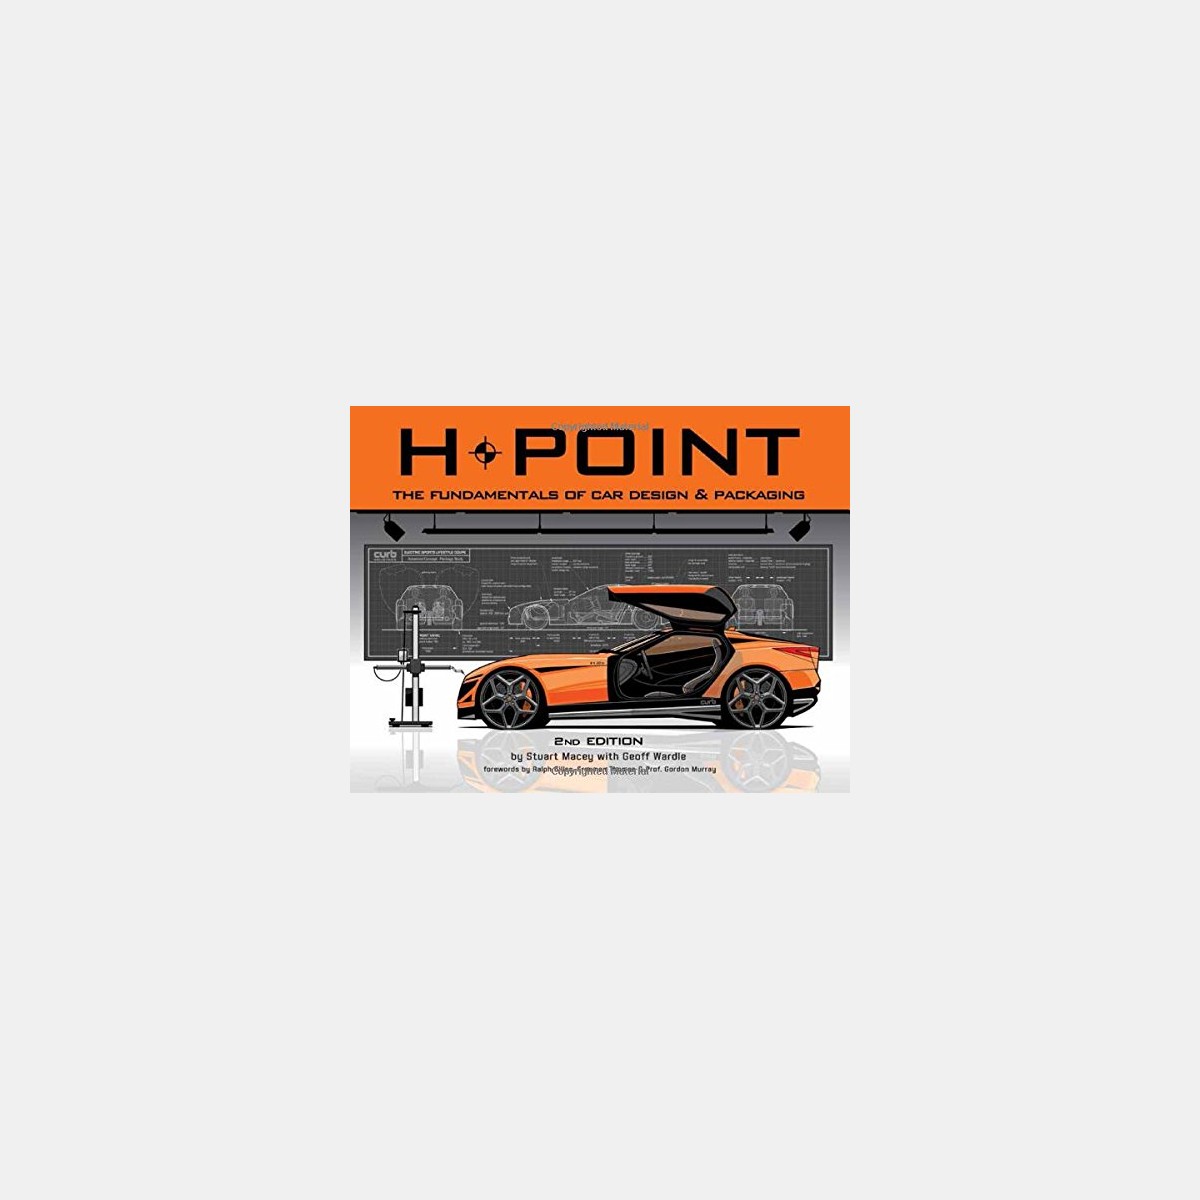 H point 2nd edition pdf download 1984 book pdf download